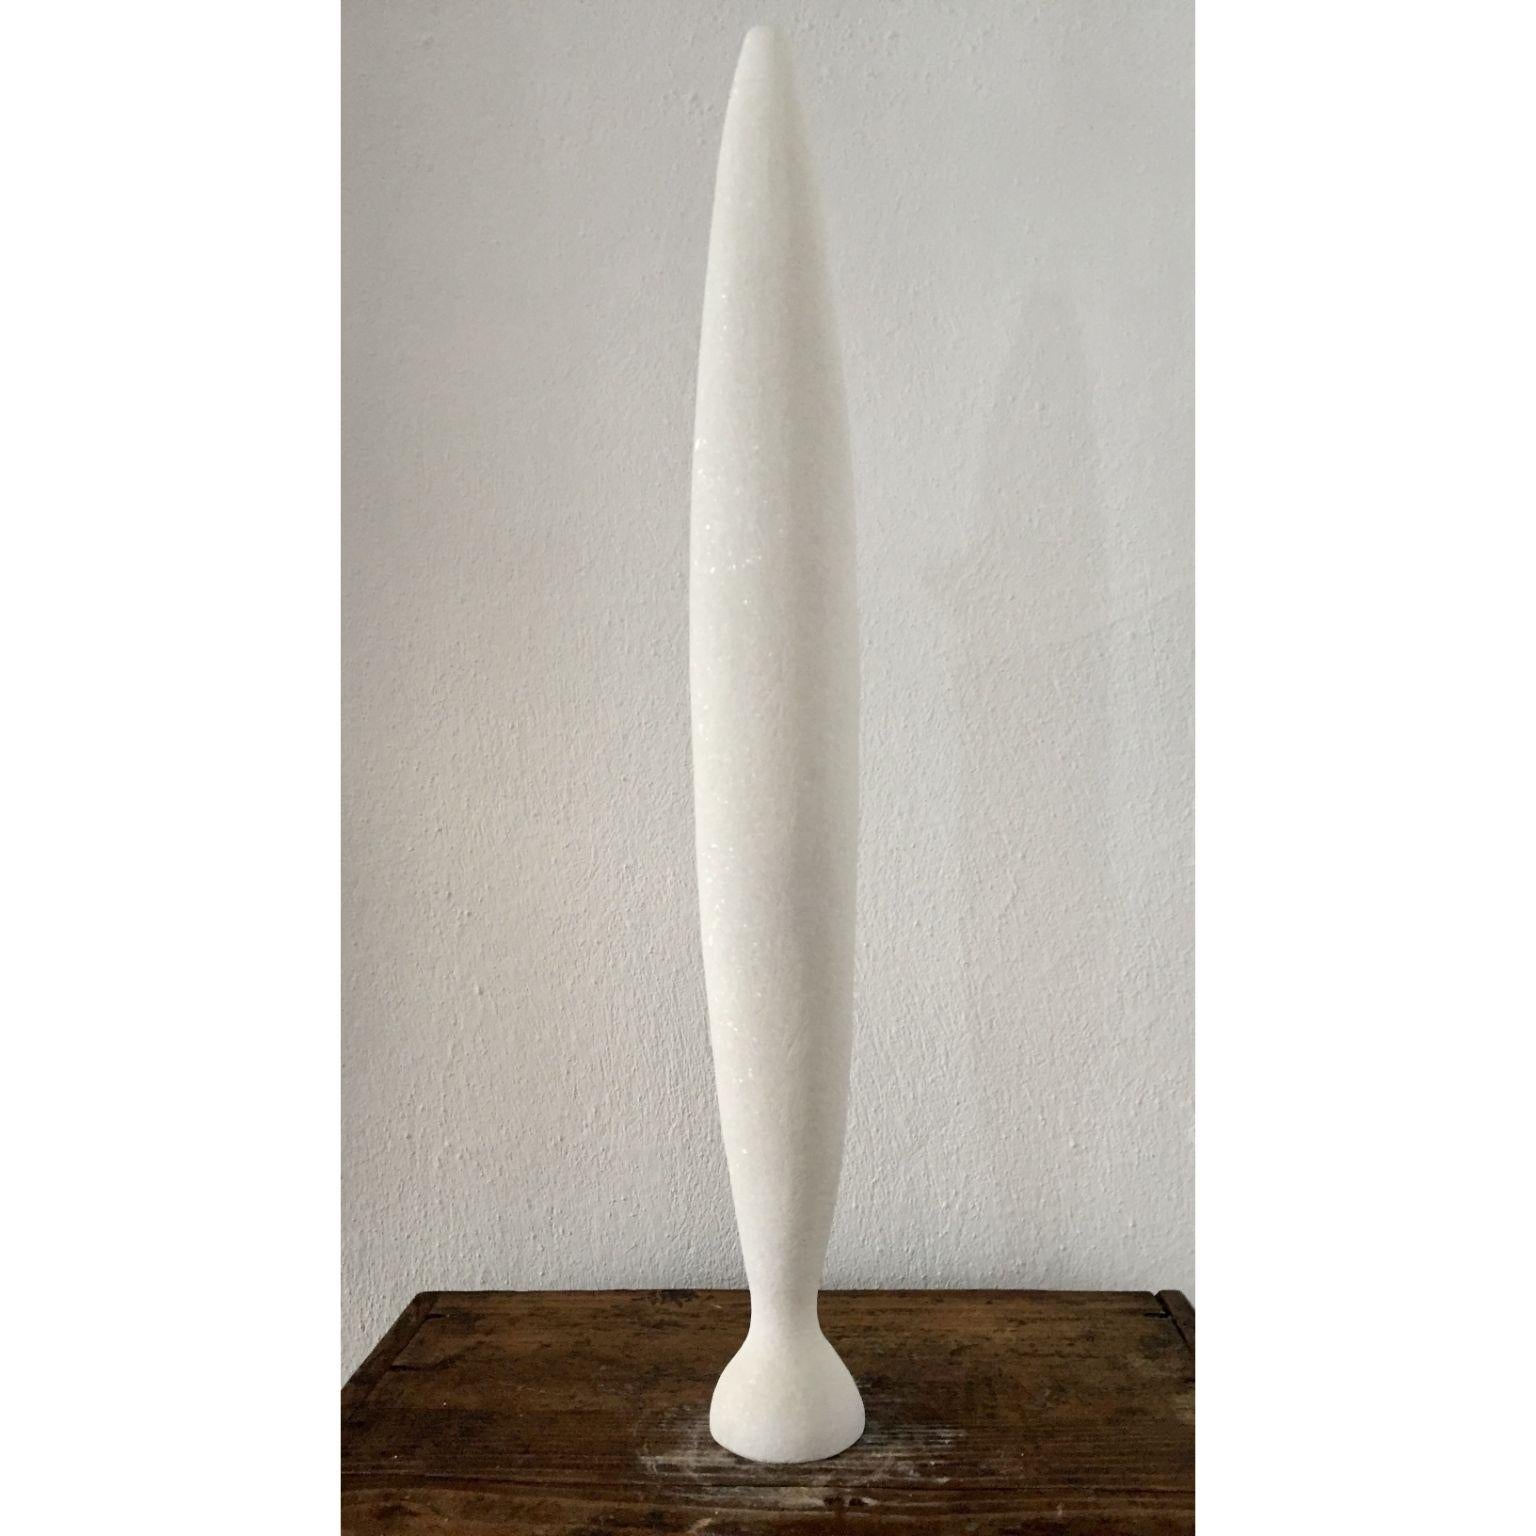 Greek Aphrodite Hand Carved Marble Sculpture by Tom Von Kaenel For Sale